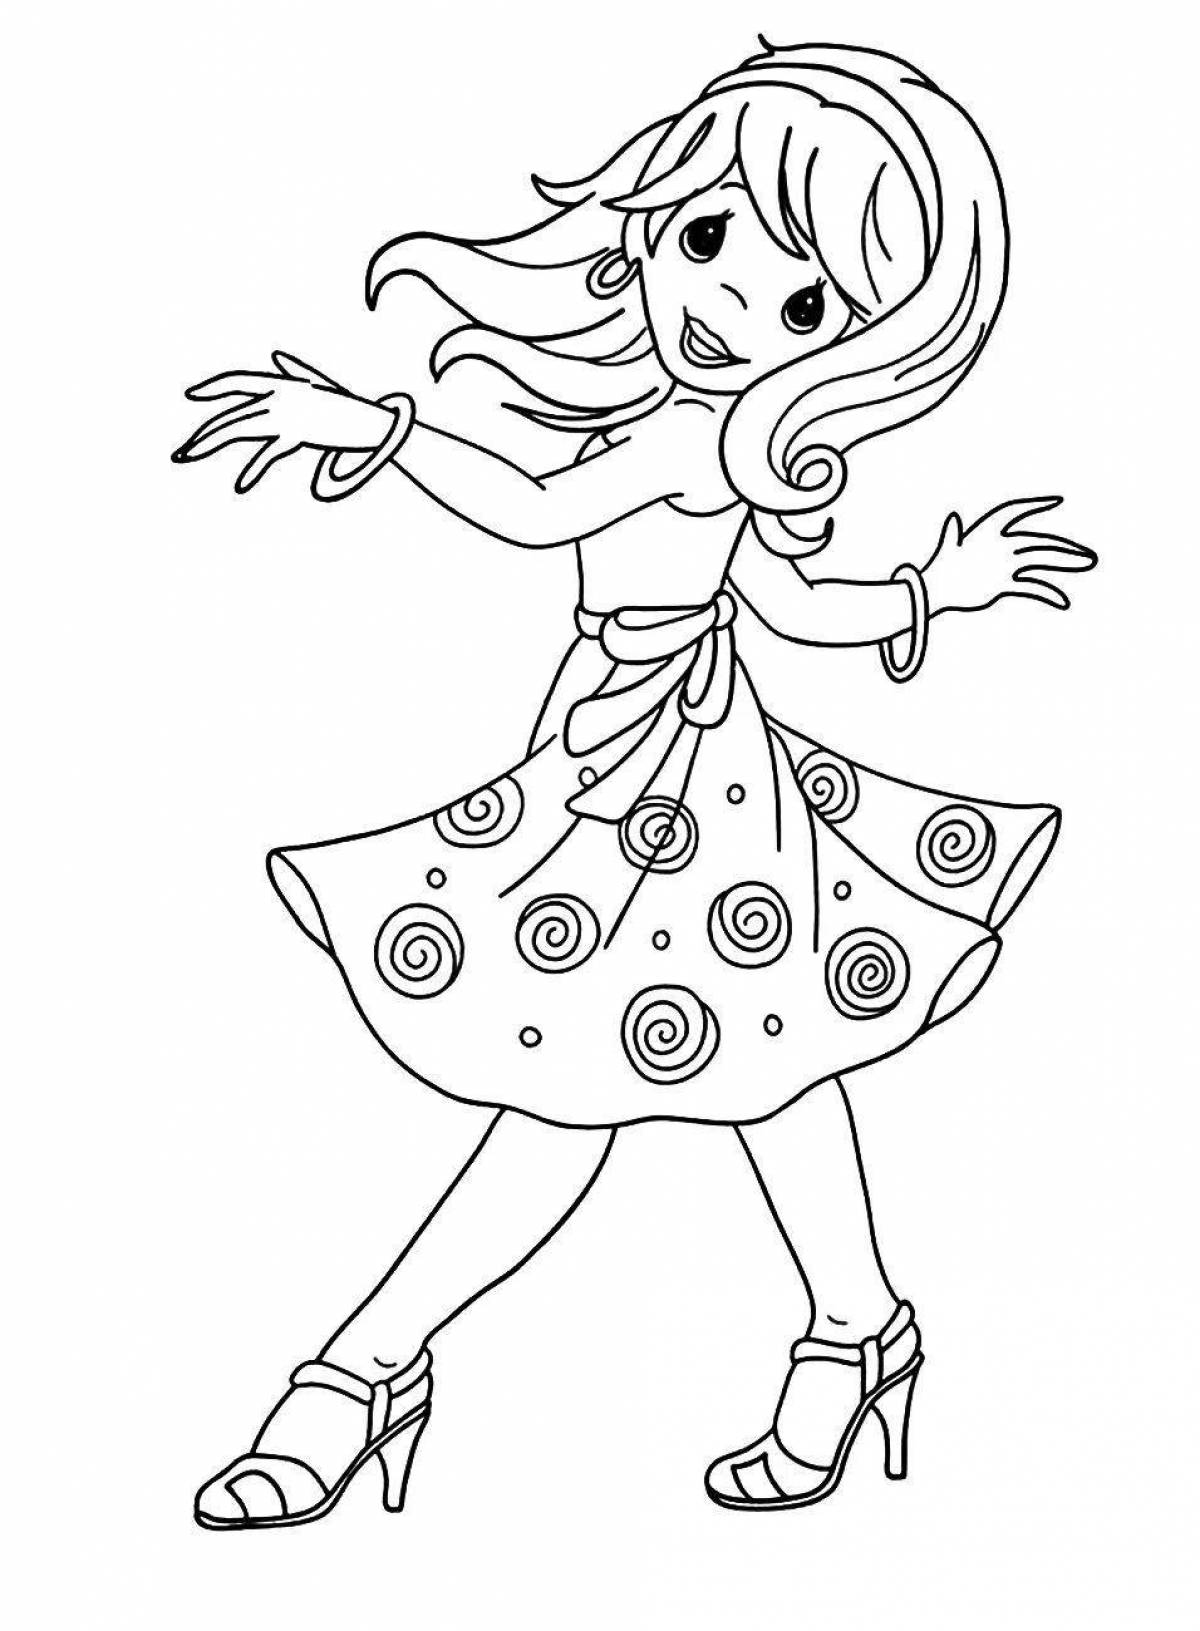 Funny dancing coloring pages for kids